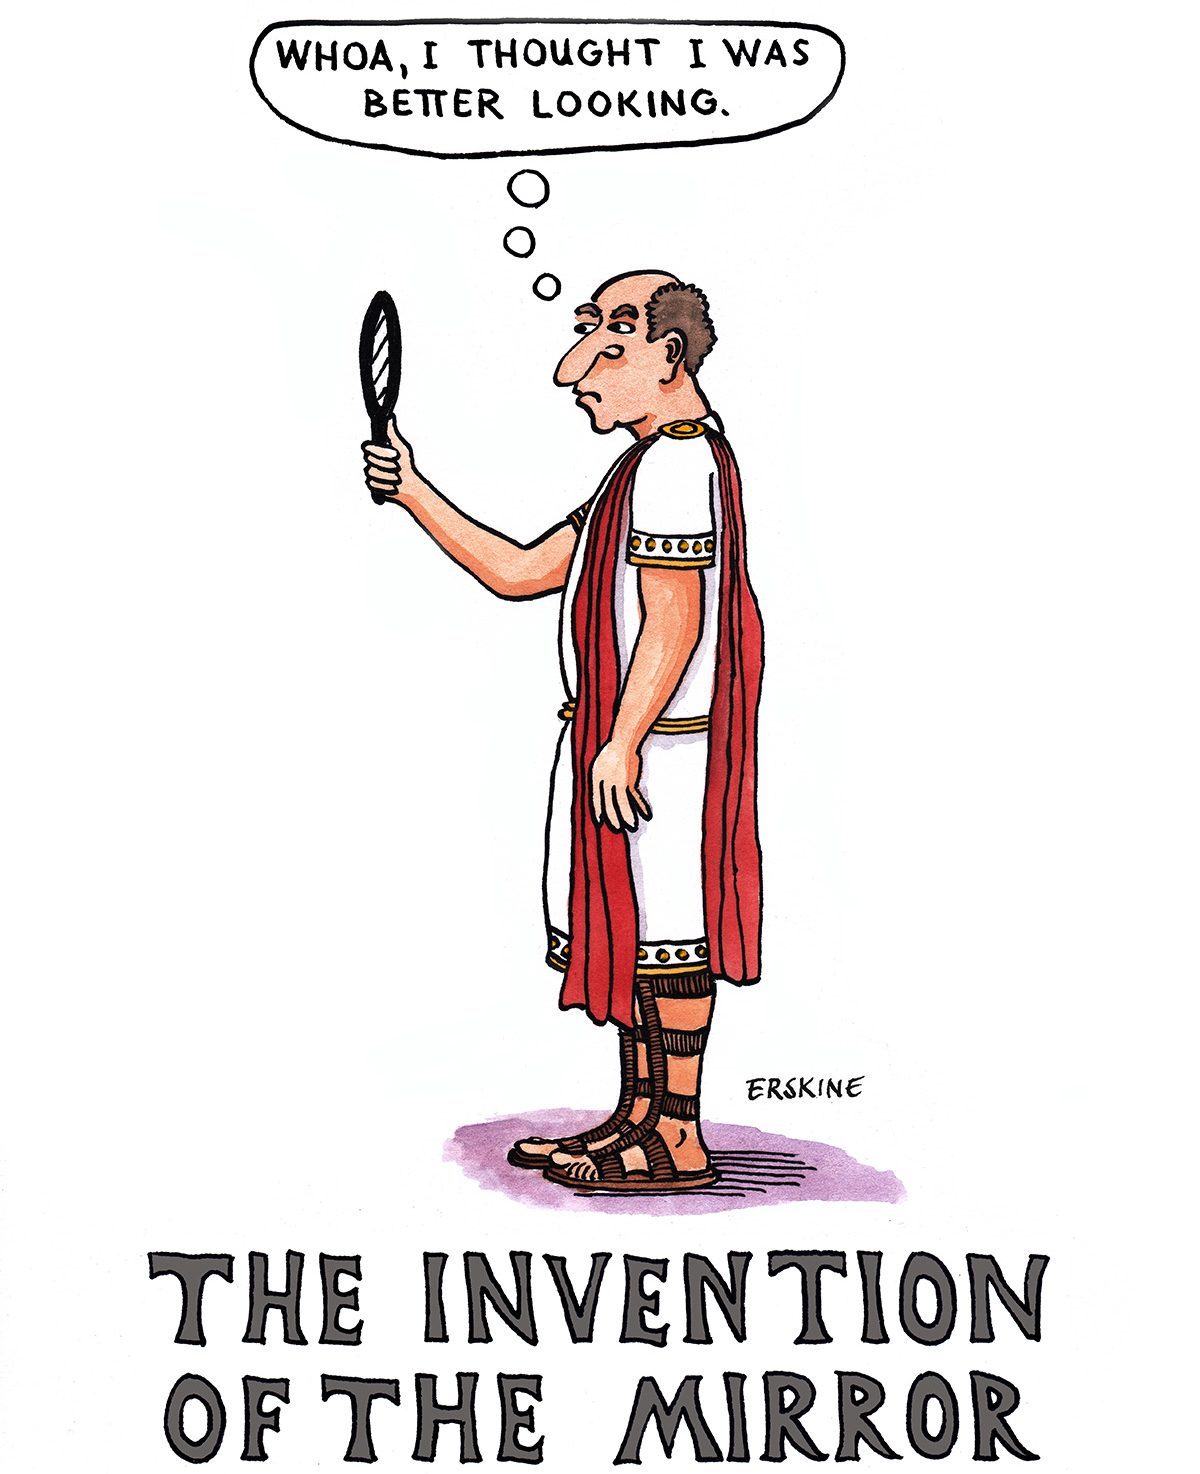 The Invention of the Mirror: a man in ancient roman dress looks in a mirror and thinks, "whoa, i thought i was better looking."